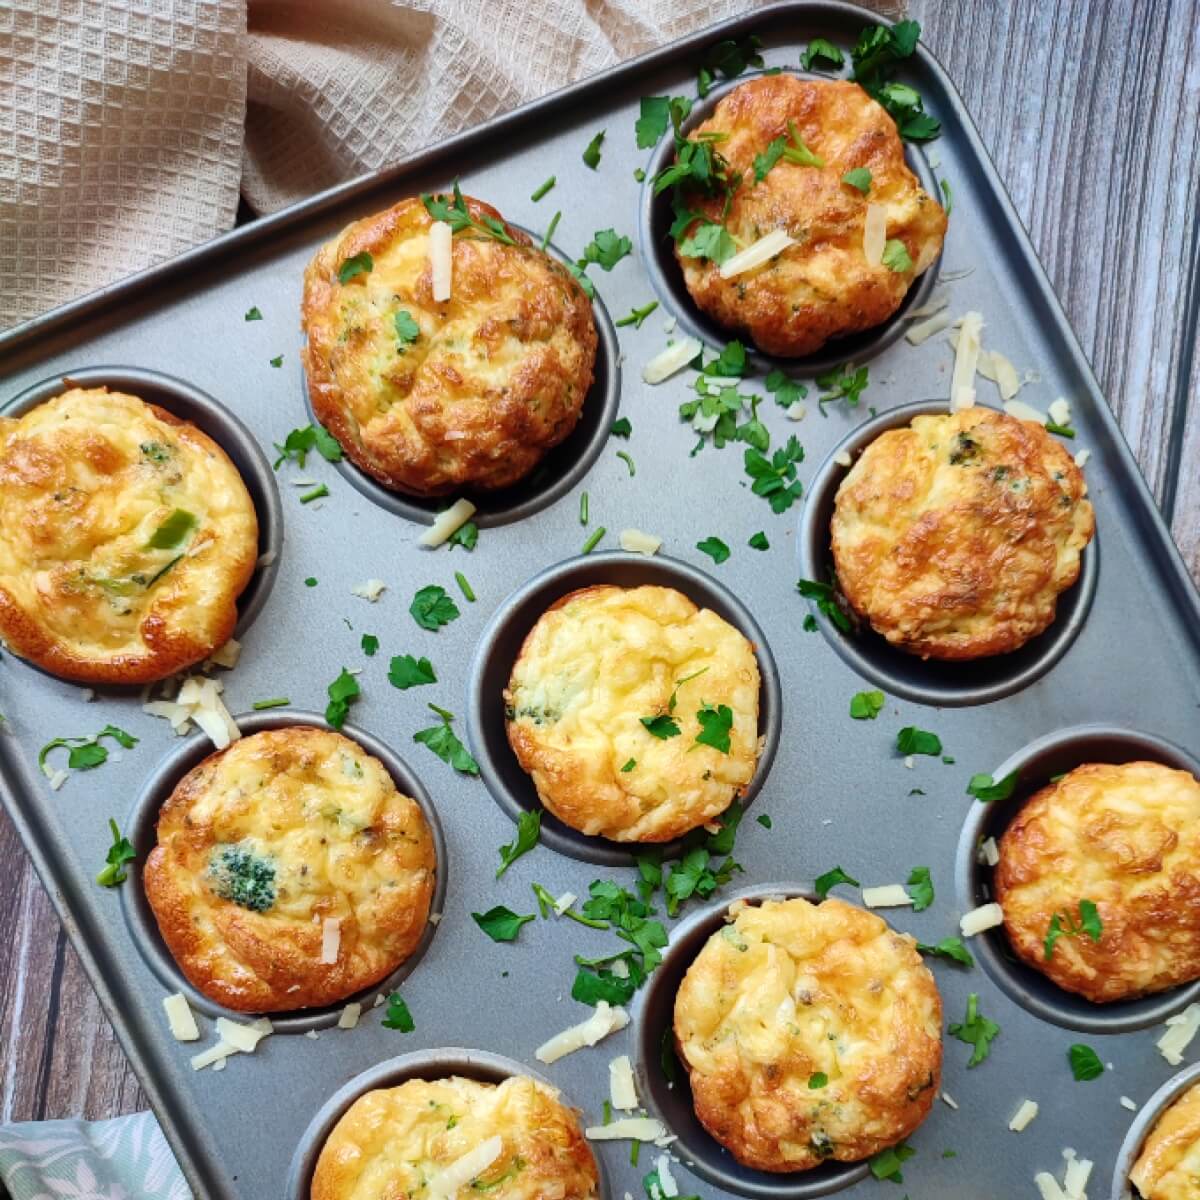 Finished egg muffins with Broccoli